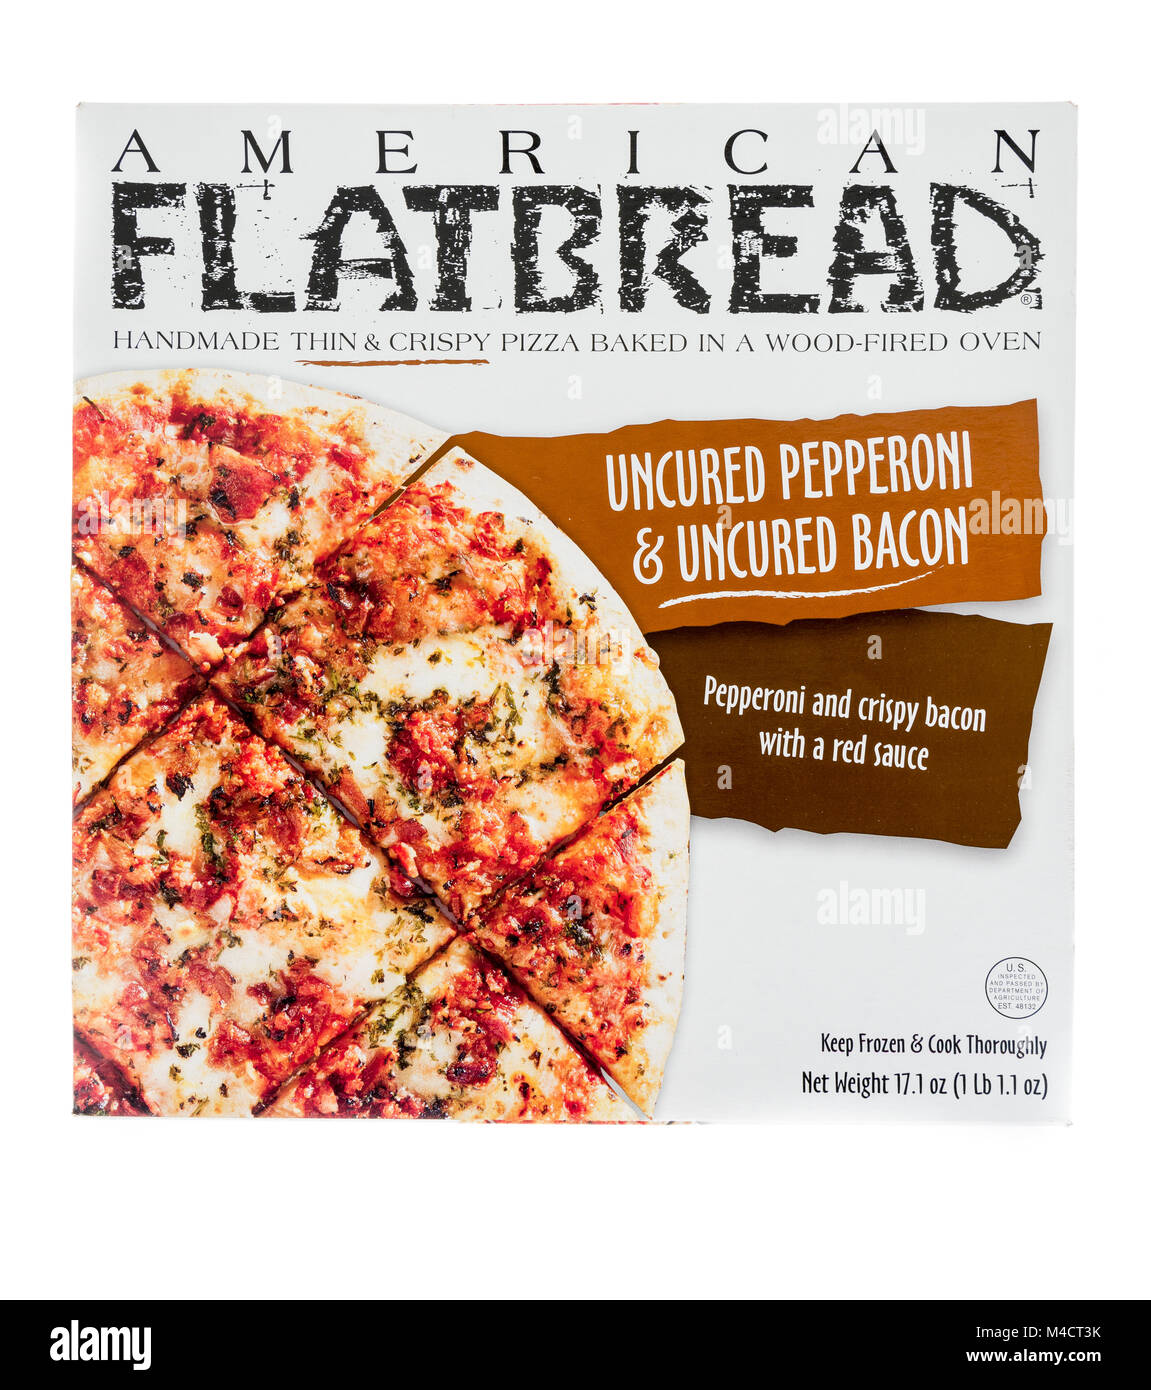 Winneconne, WI - 10 February 2018: A box of American Flatbread thin crust pepperoni and bacon pizza on an isolated background. Stock Photo